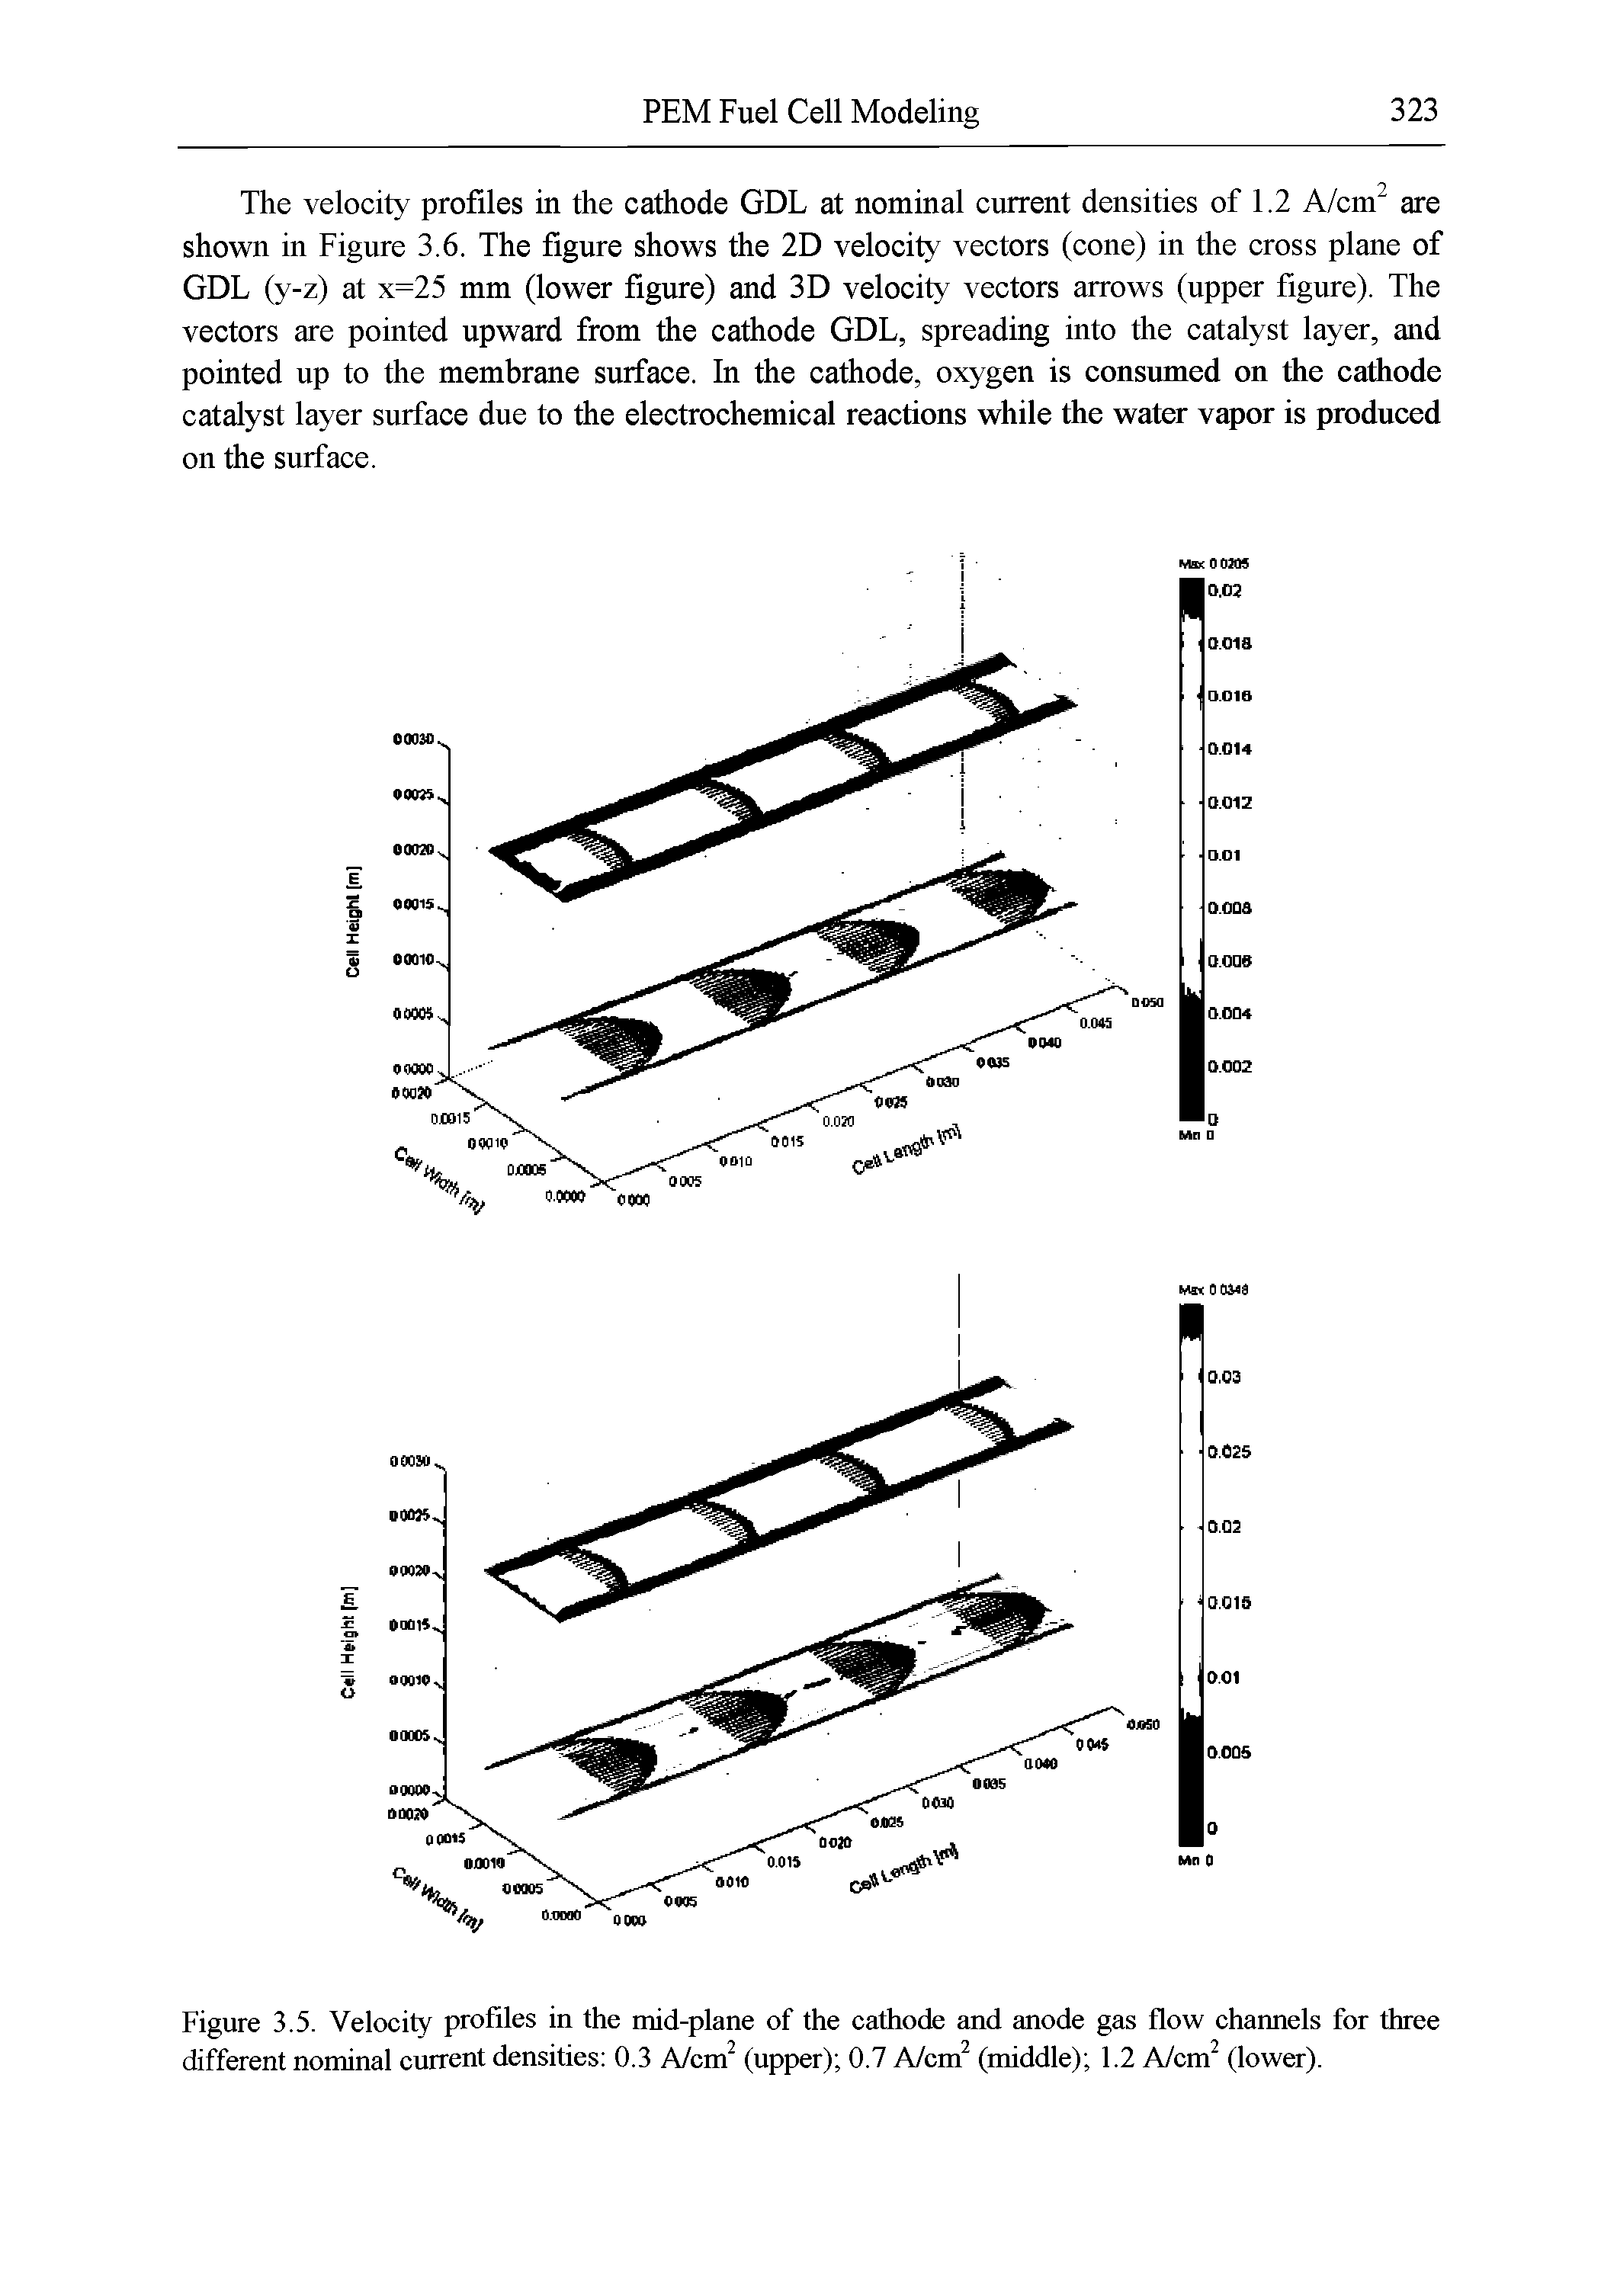 Figure 3.5. Velocity profQes in the mid-plane of the cathode and anode gas flow channels for three different nominal current densities 0.3 A/cm (upper) 0.7 AJcm (middle) 1.2 A/cm (lower).